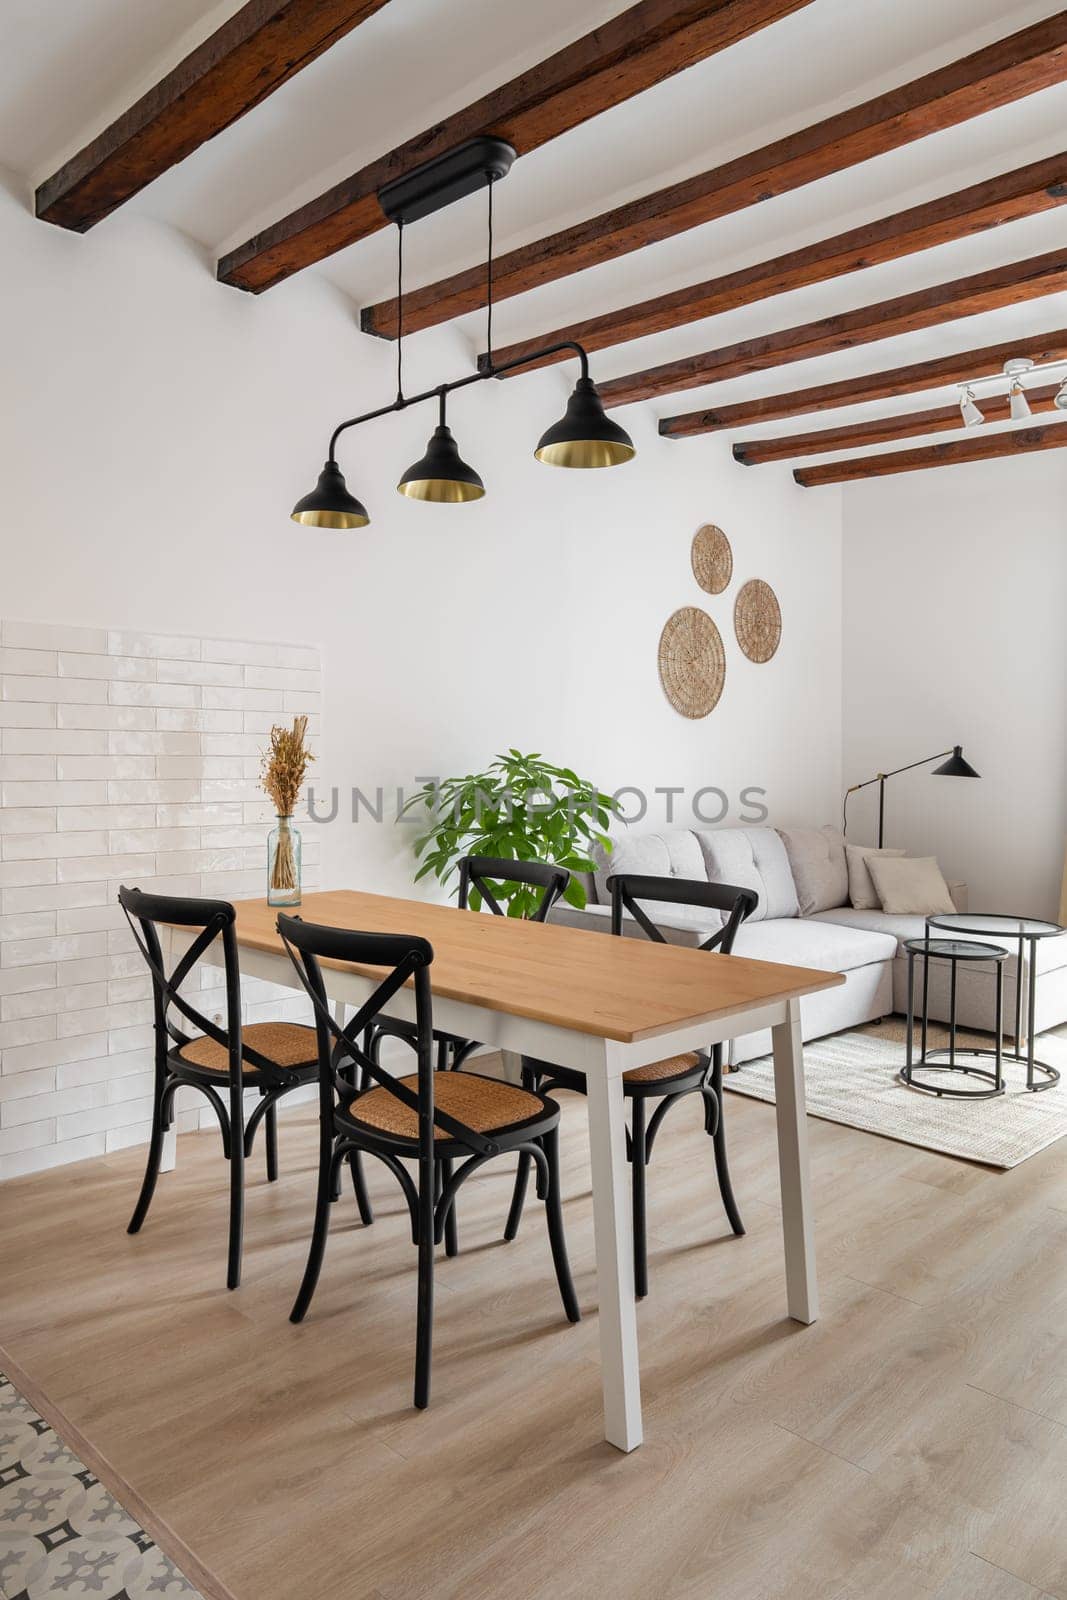 Dining table with chairs under metal luster in studio apartment. Cosy place to eat with vintage furniture in home interior. Elegant design